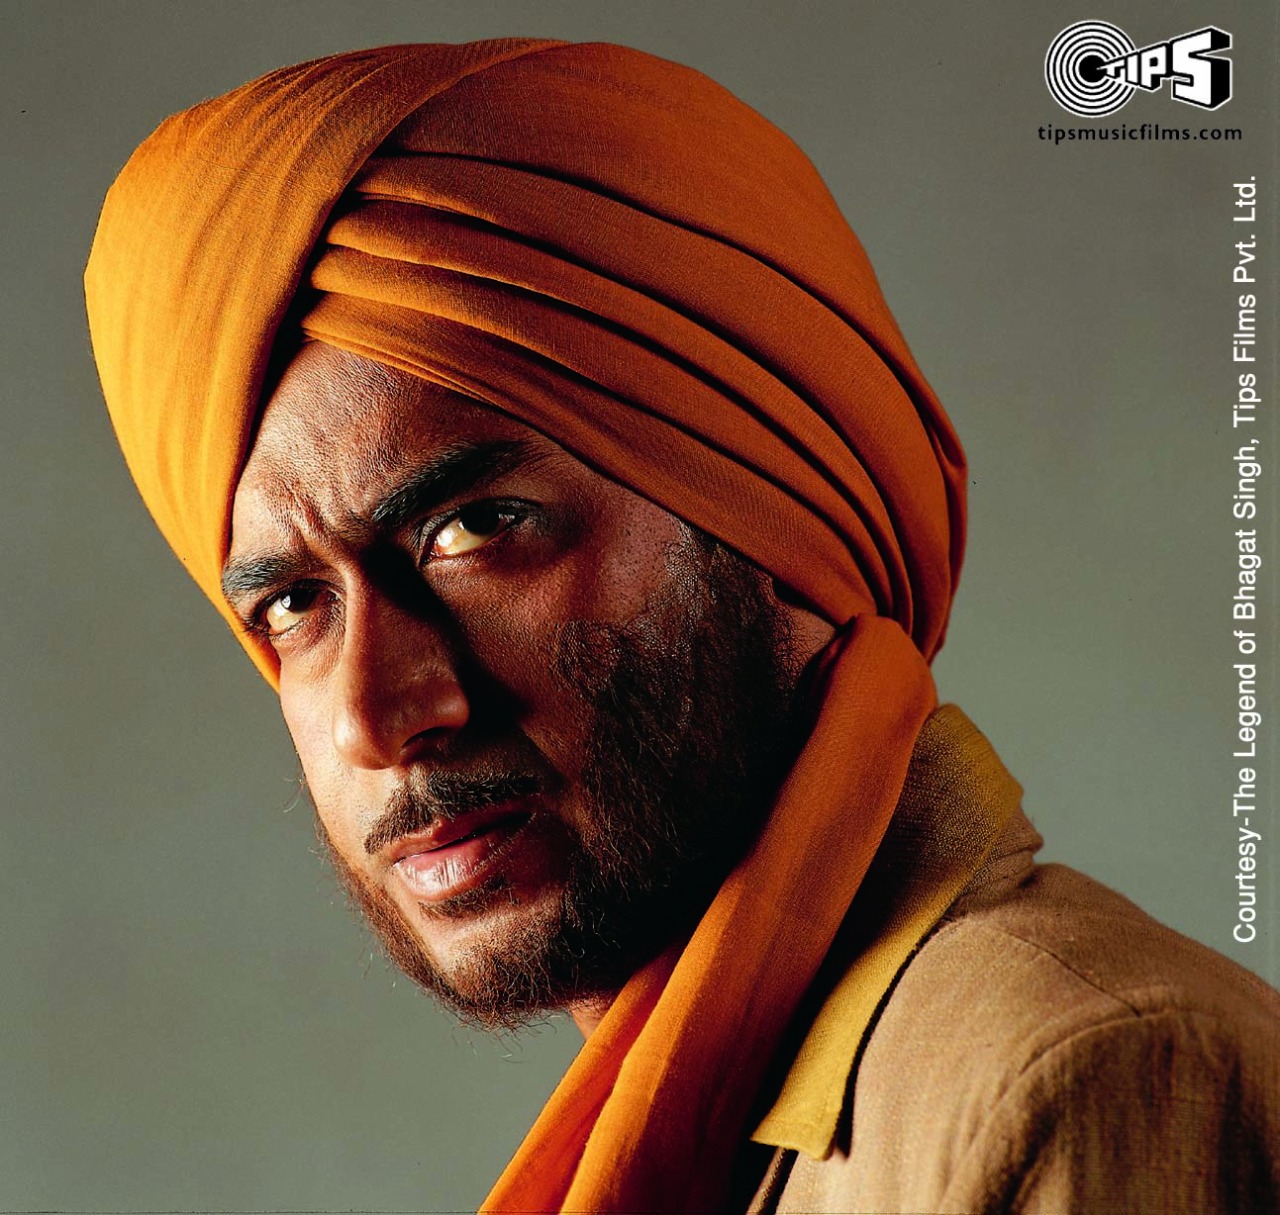 Tips Music walks down the memory lane with Ajay Devgn's hit song Des Mere - a chartbuster of its time. (2)